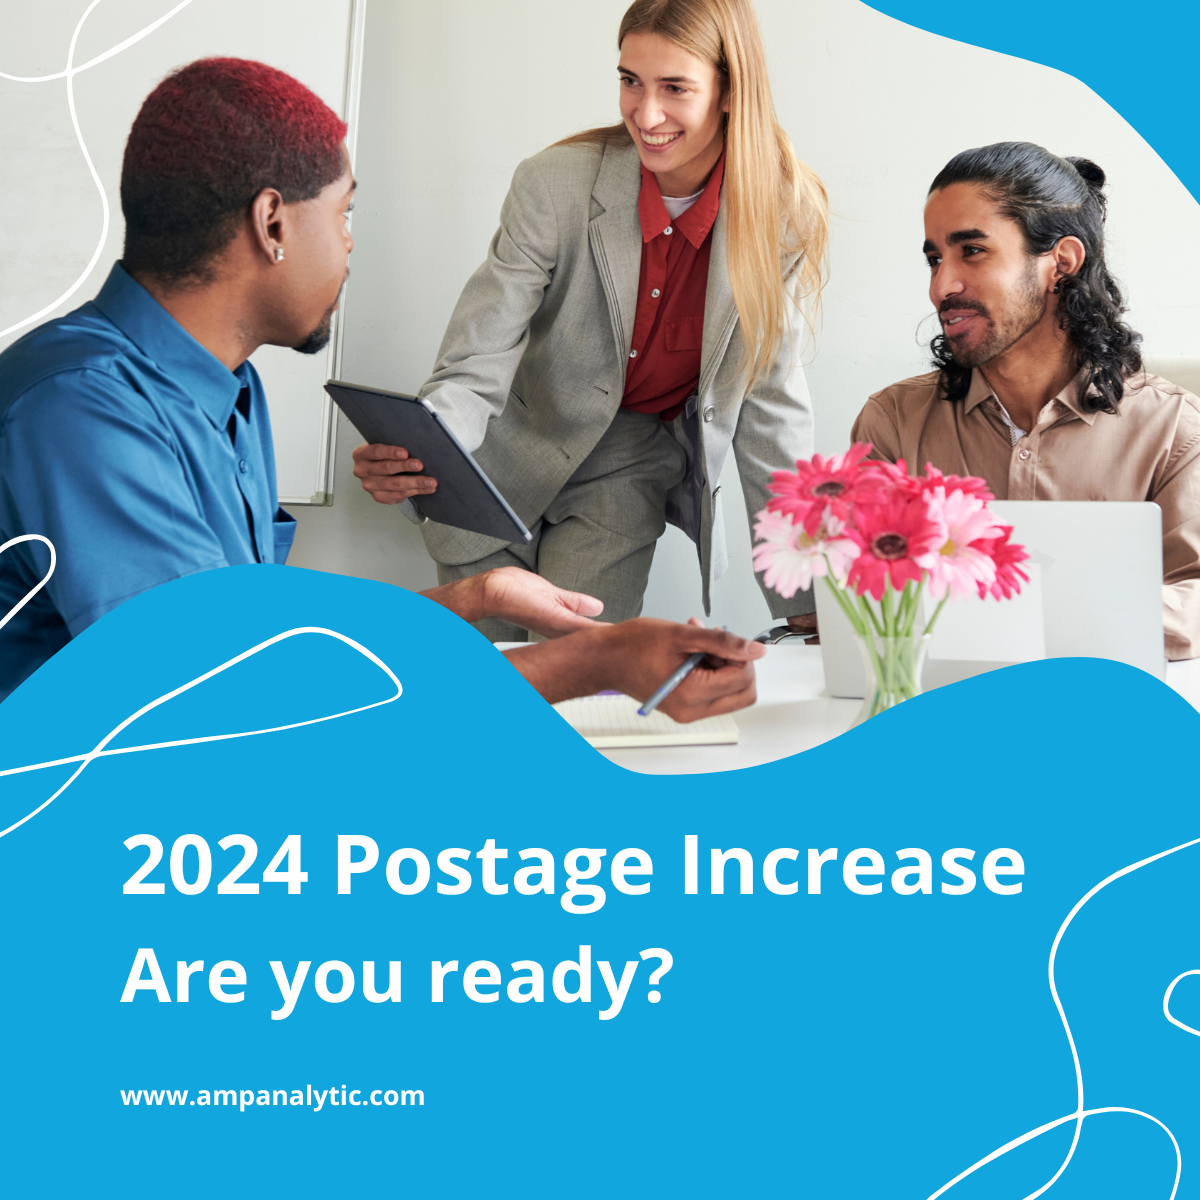 2024 Postage Increase - Are you ready